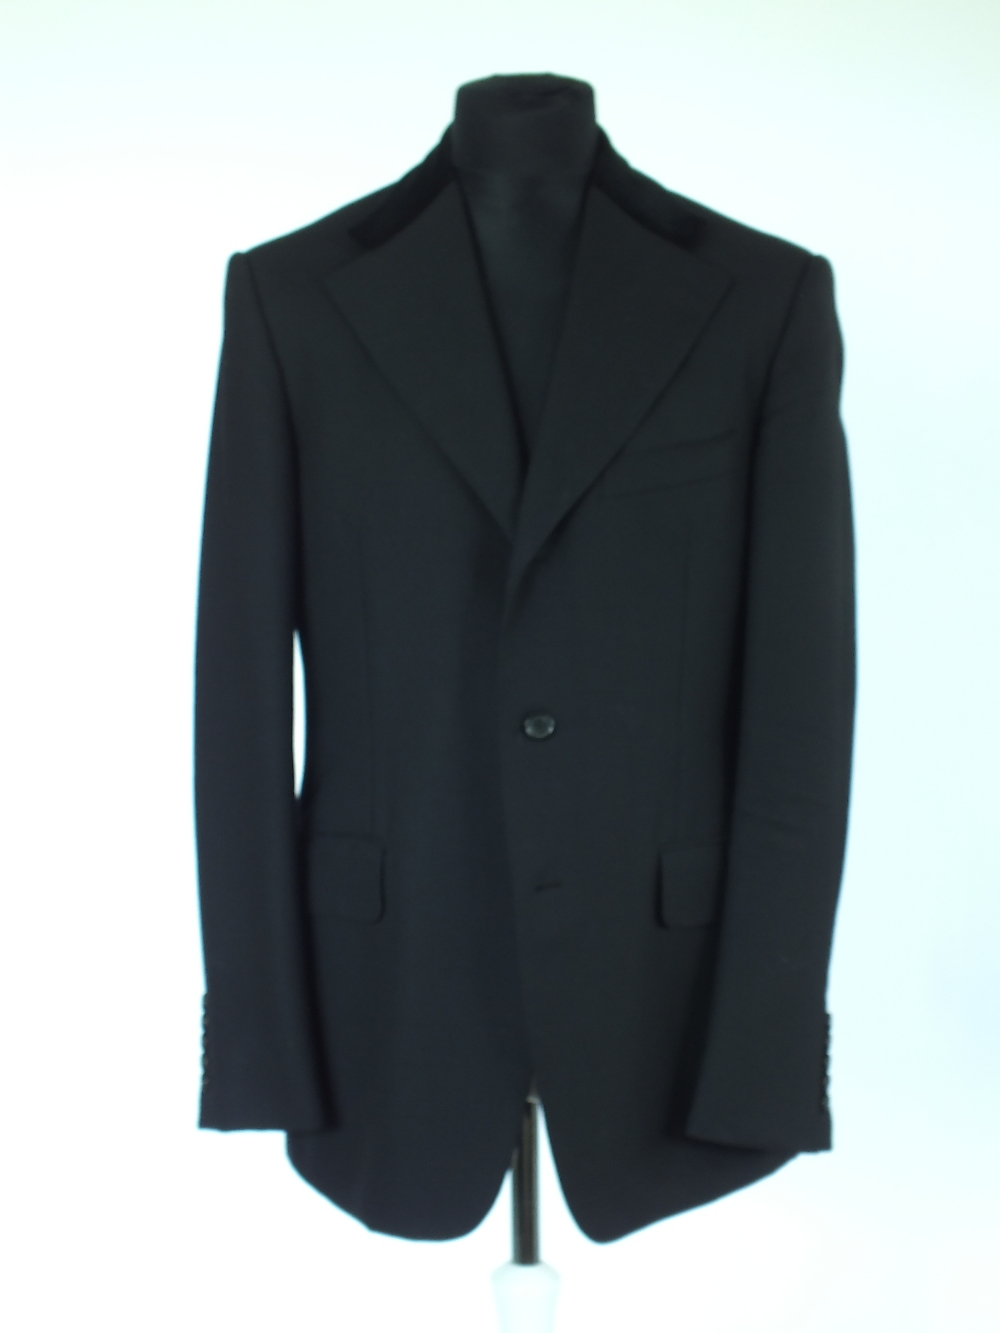 A Gucci dinner jacket, black, part velvet collar, double vented, lined, Italian size 50R, 100% wool